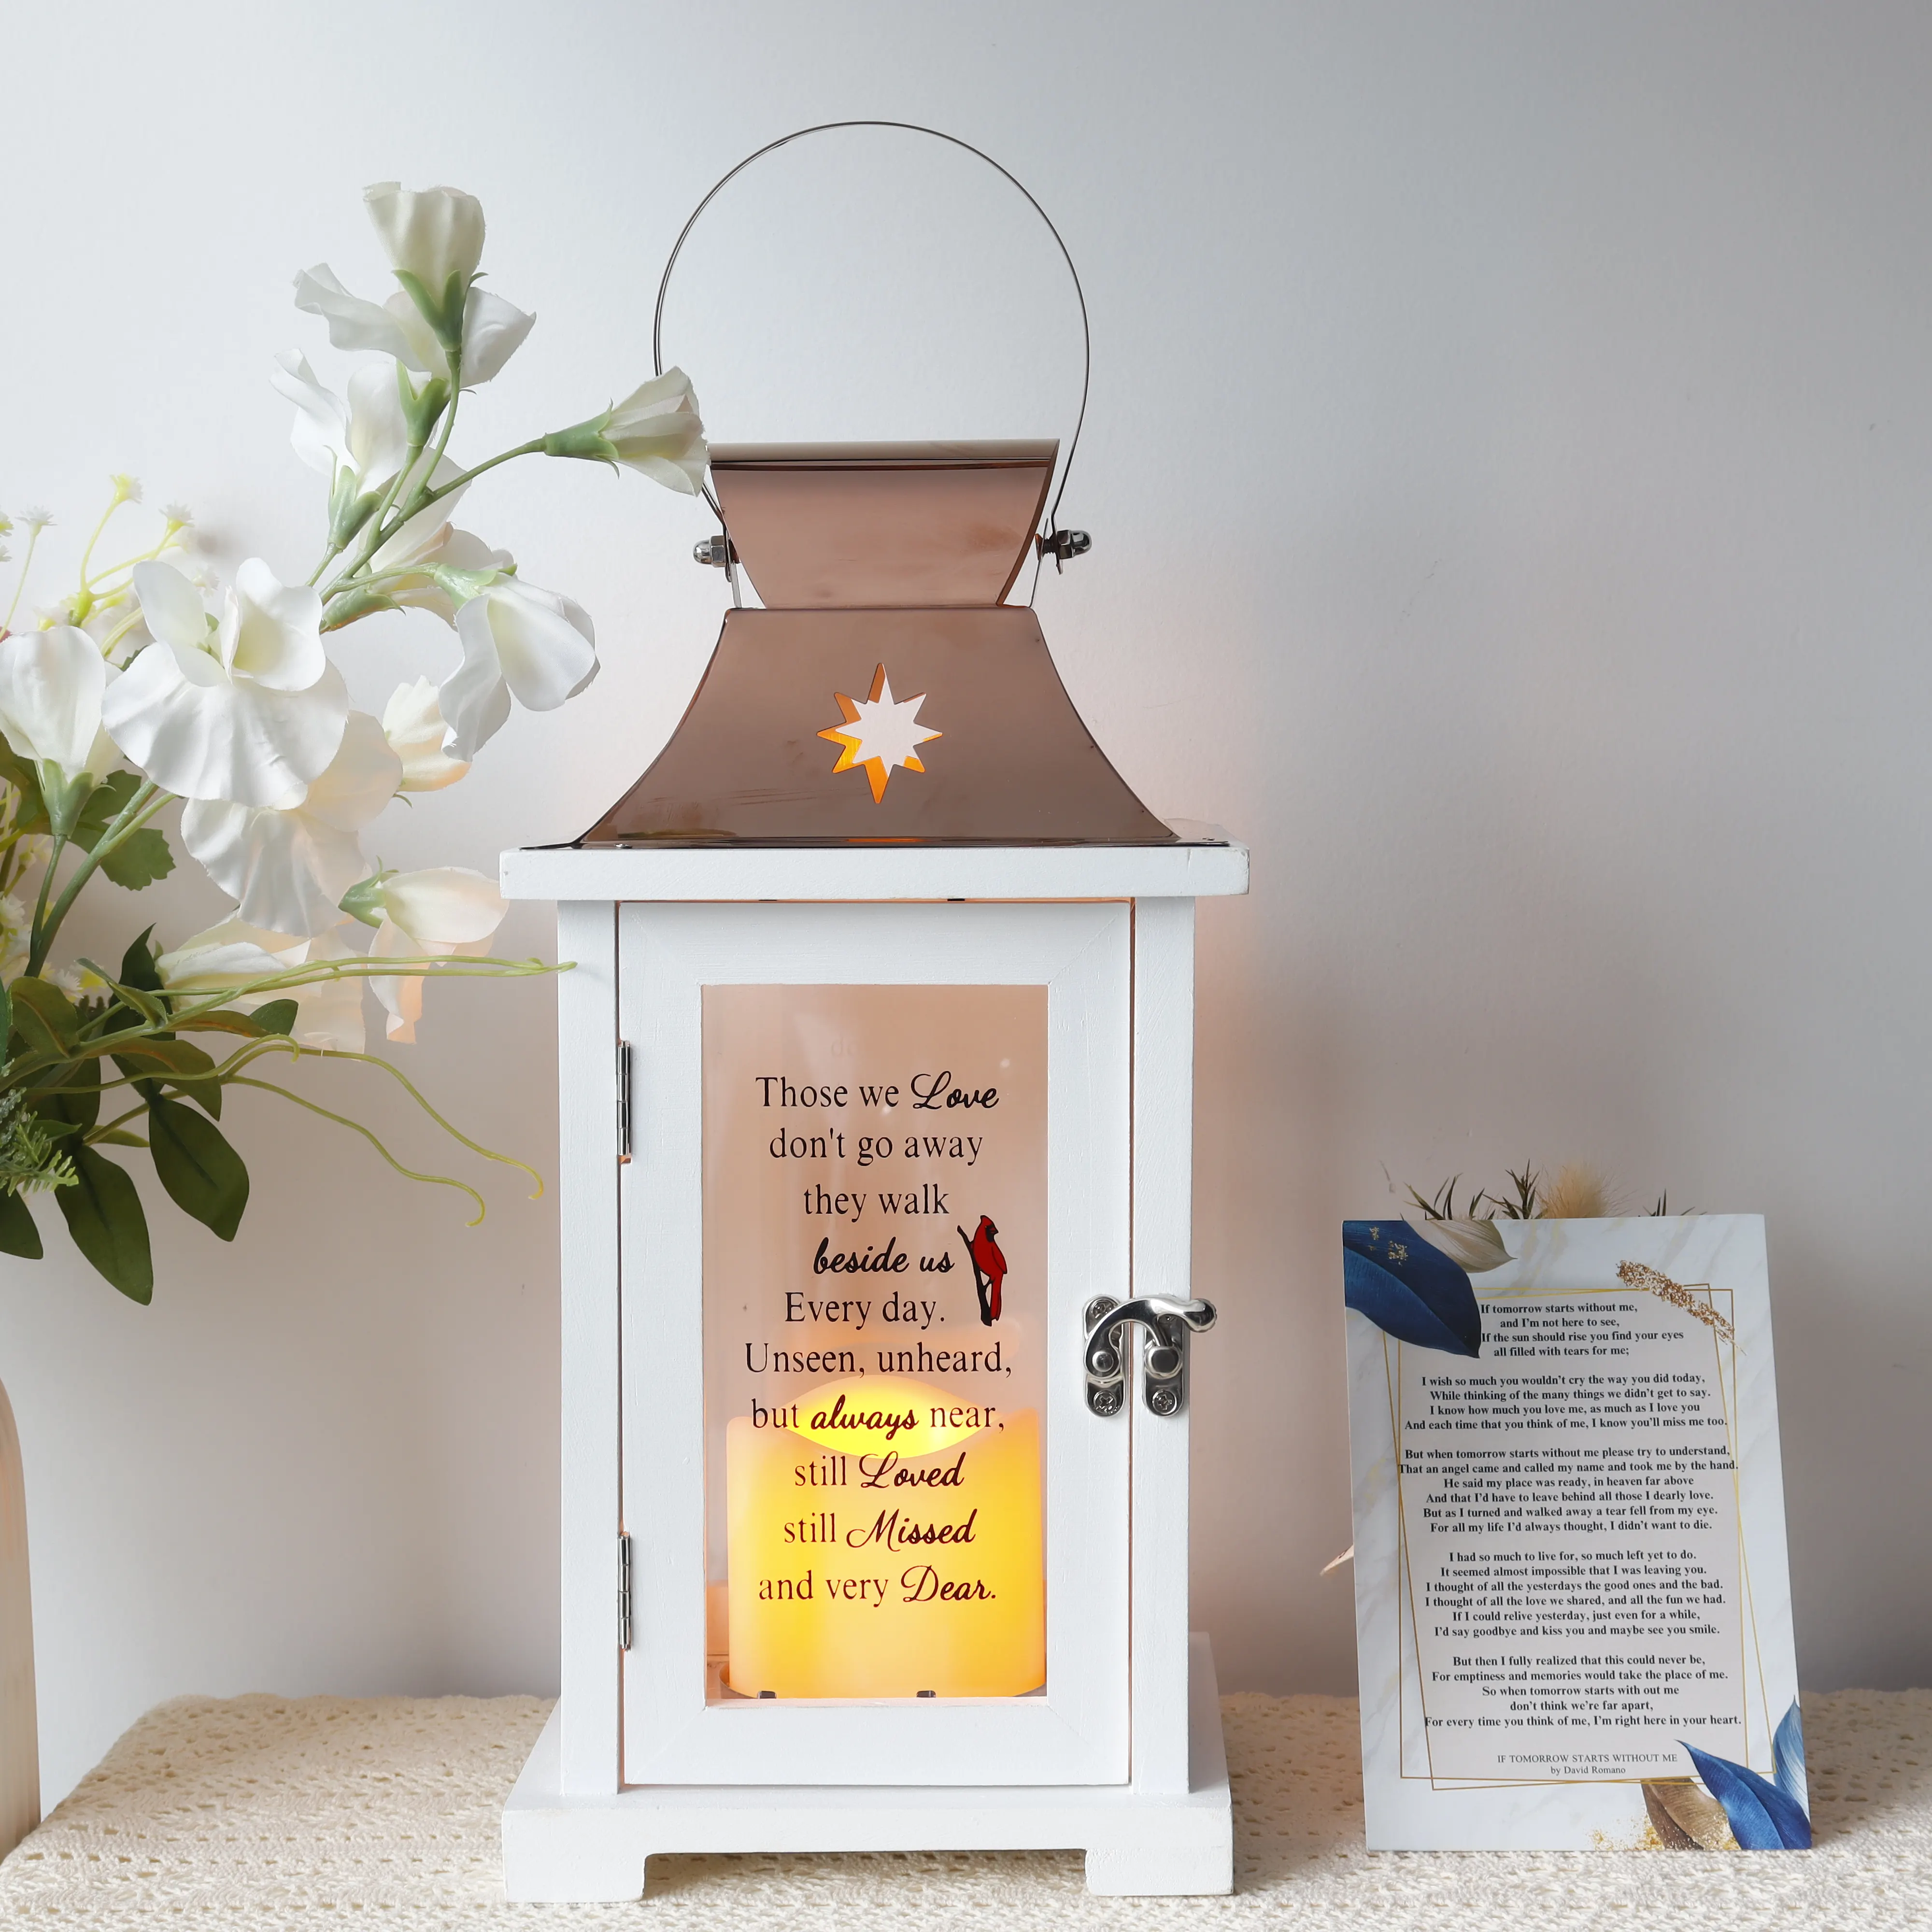 Outdoor Decorative Wooden White Memorial Candle Lanterns Rose Gold Stainless Steel Candle Holder